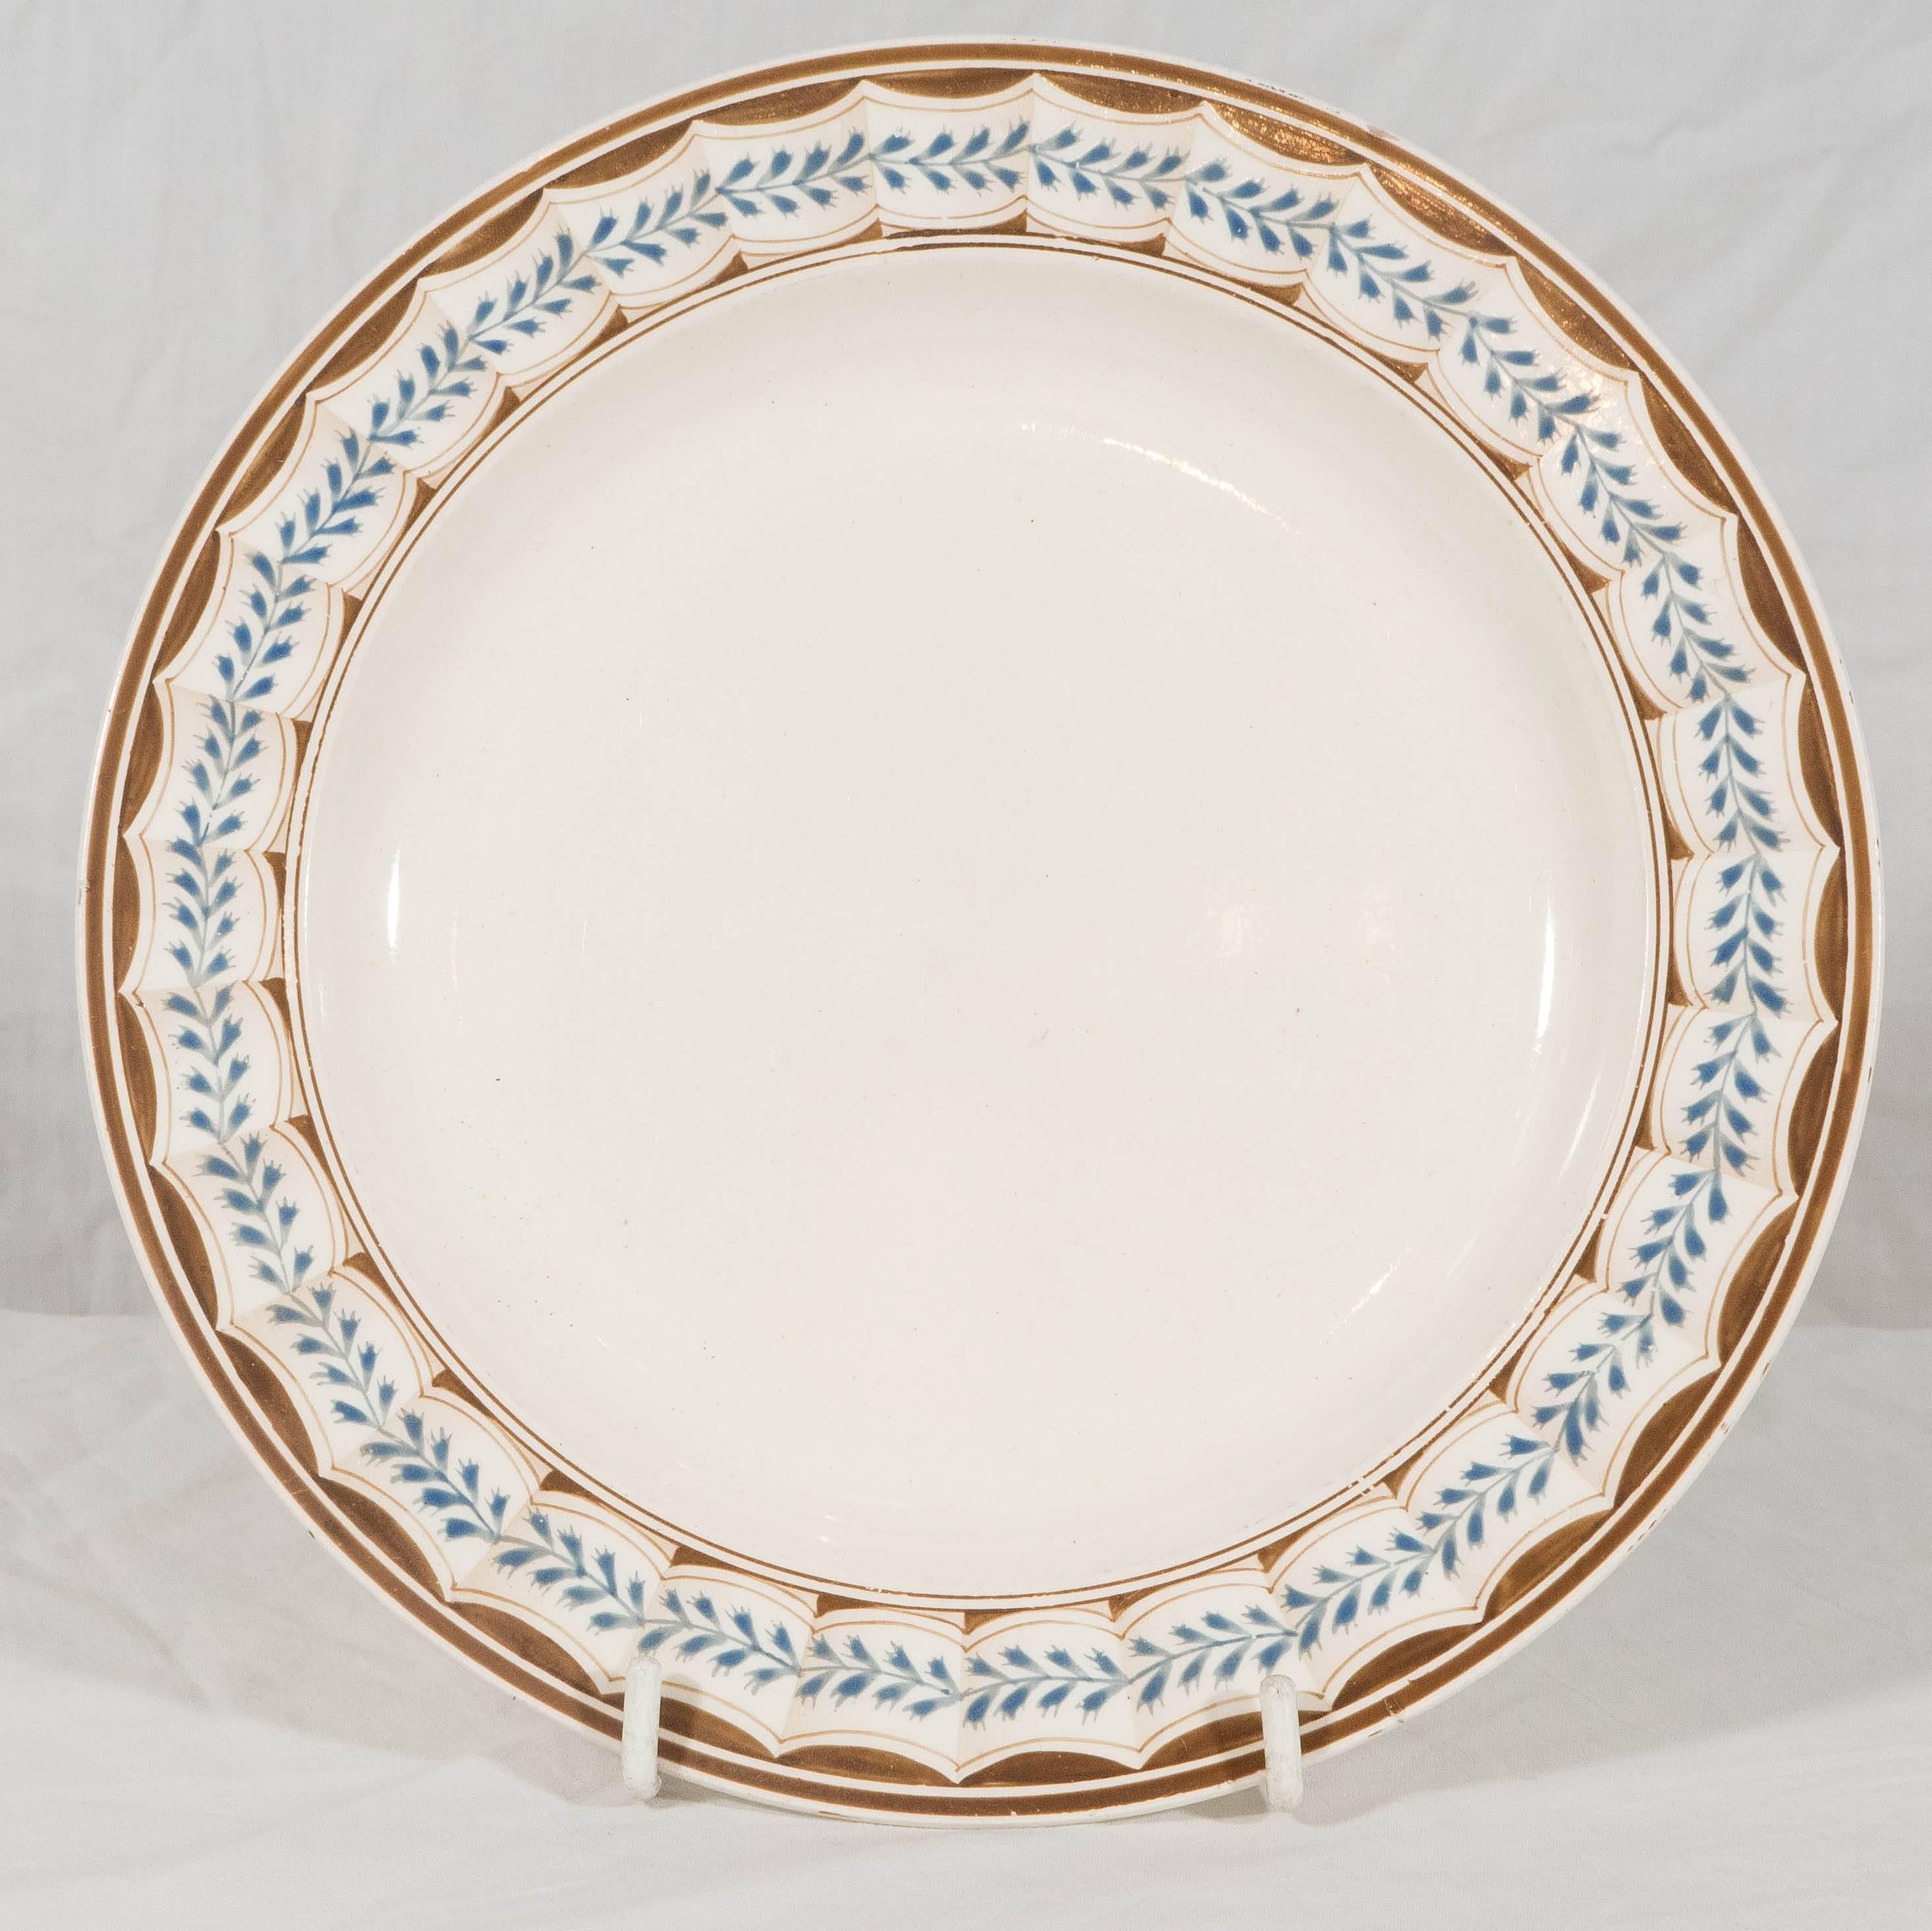 Two pairs of Wedgwood creamware dishes decorated in brown and light blue in the beautiful lag and feather pattern. Wedgwood created the 'lag and feather' pattern to resemble the fluting and husks used in neoclassical metalwork. An illustrated